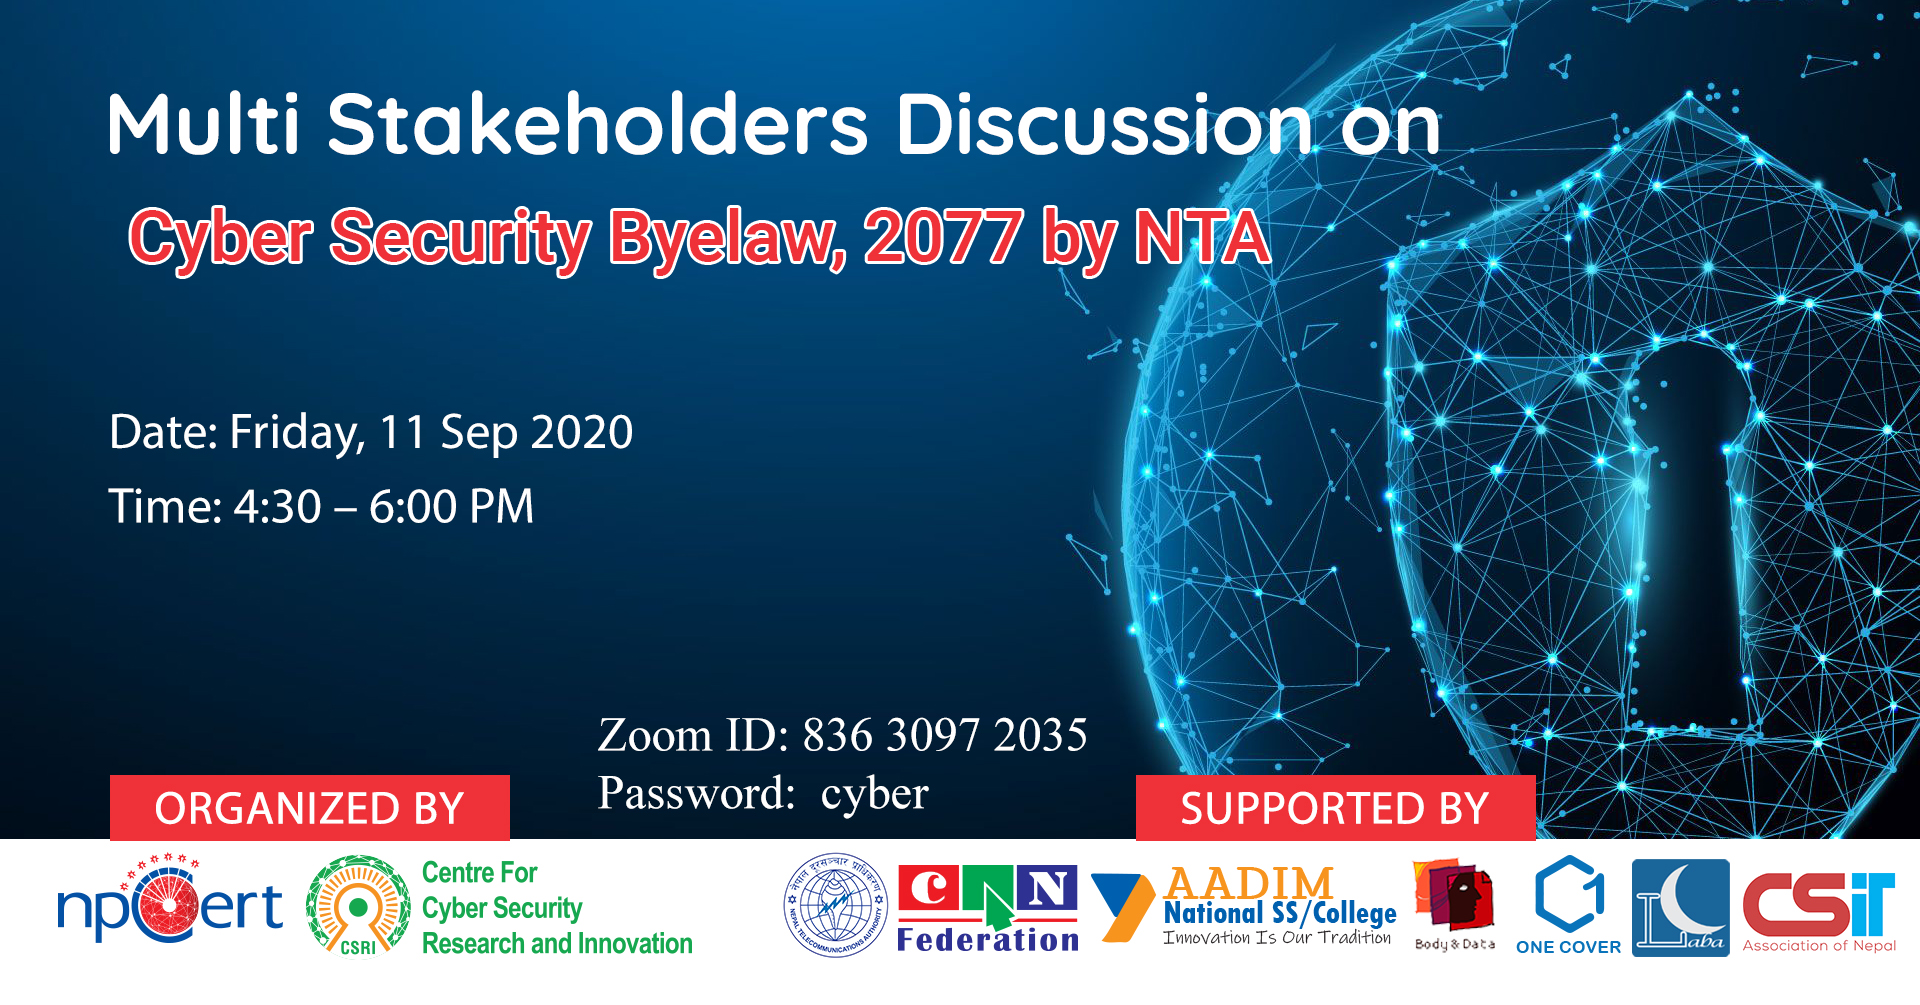 Multi-Stakeholder Discussion on Cyber Security Byelaw, 2077 (2020) by NTA